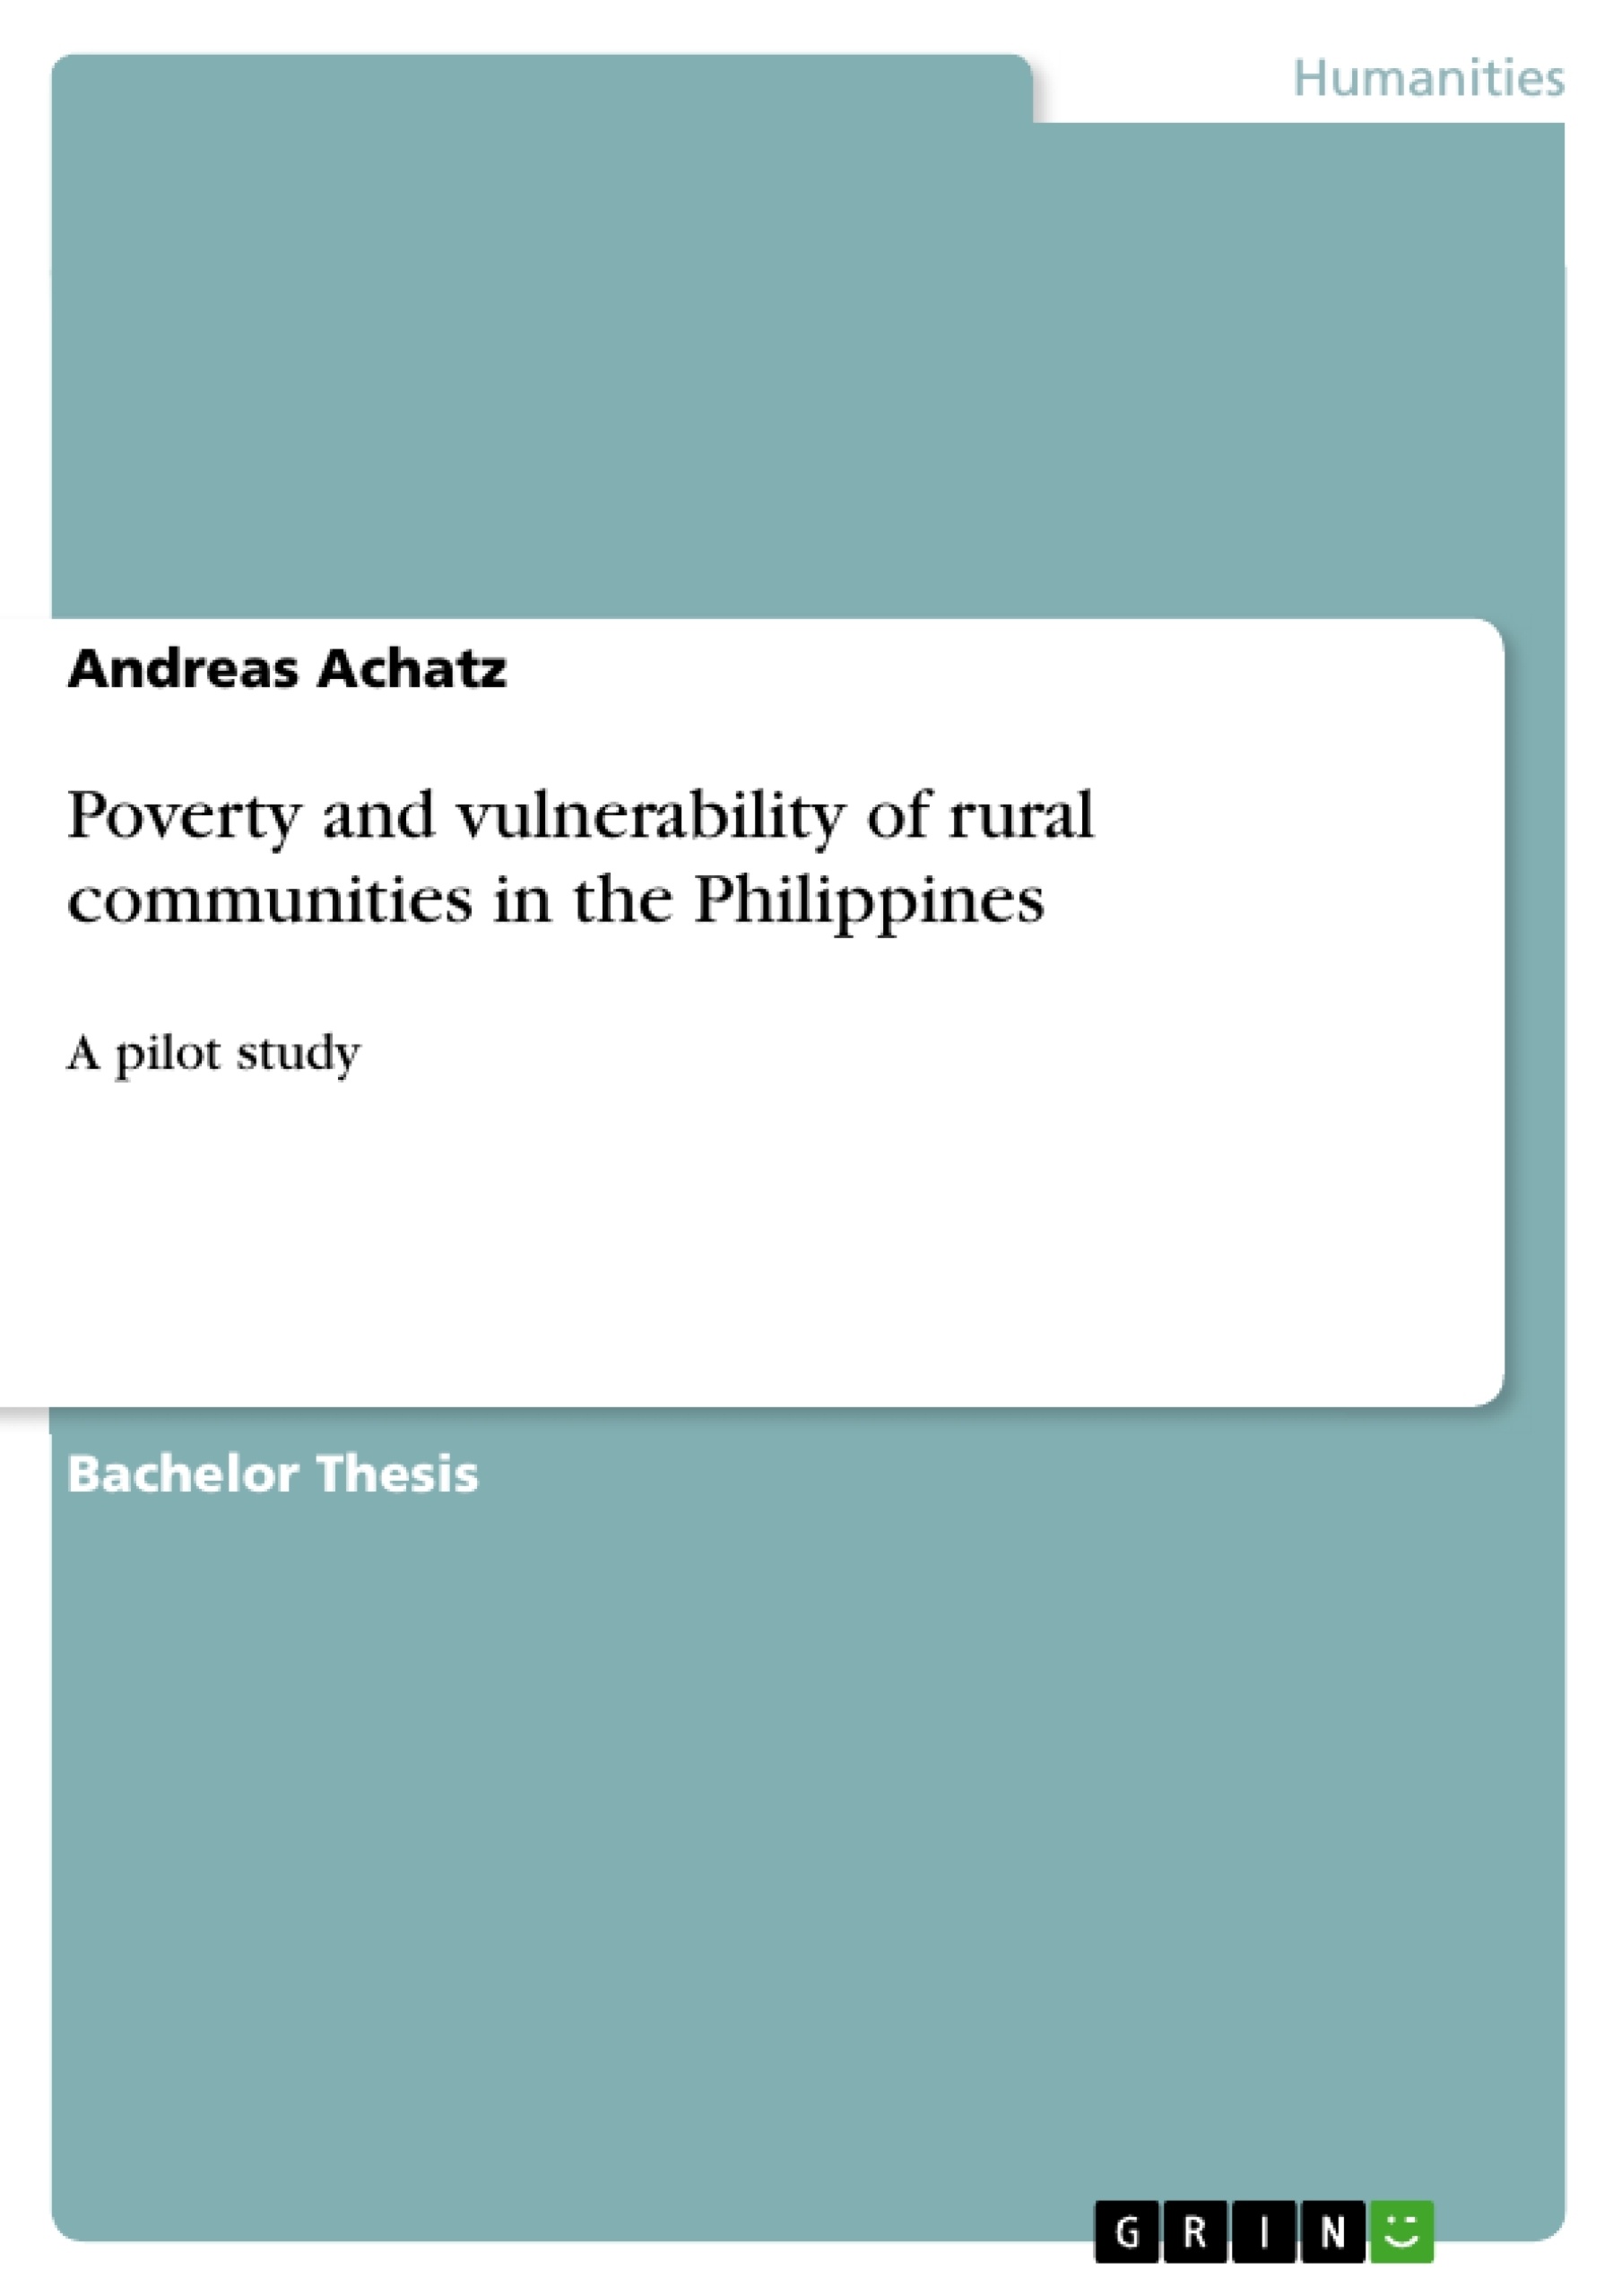 Title: Poverty and vulnerability of rural communities in the Philippines